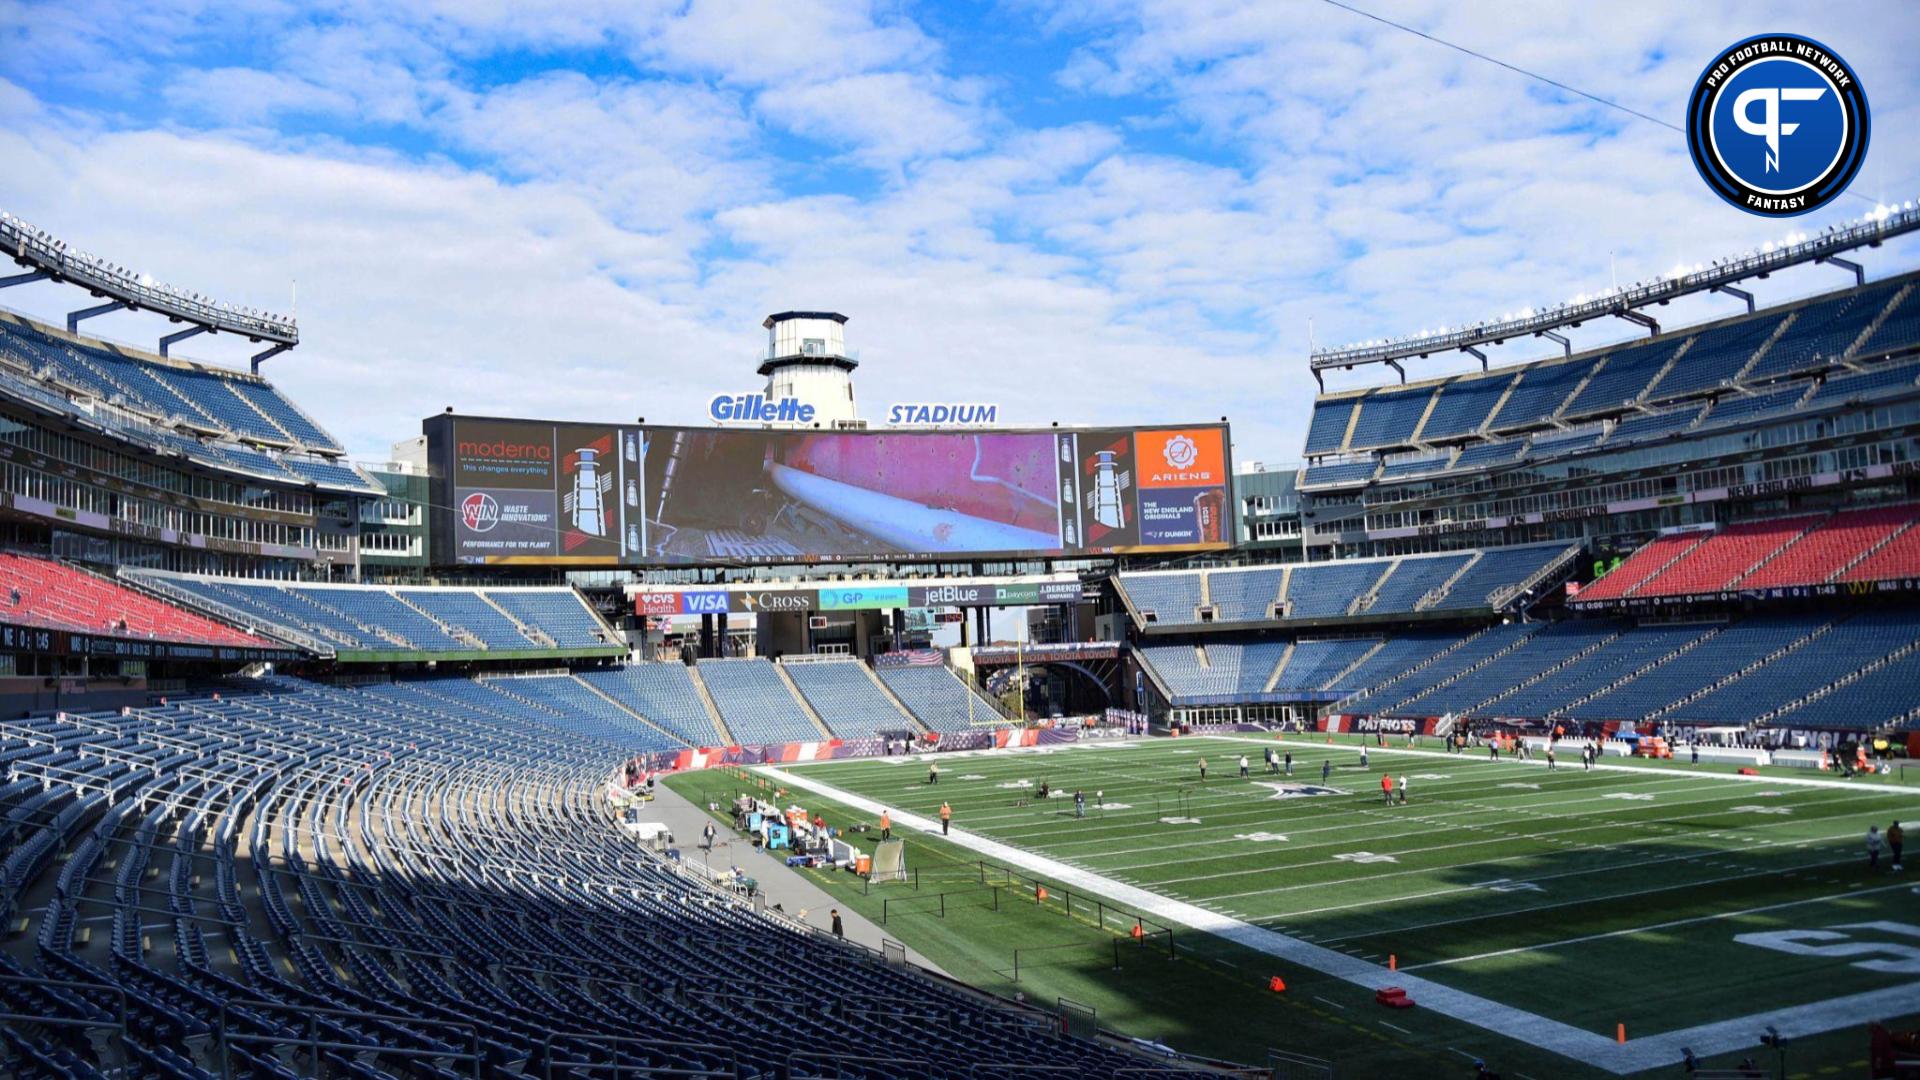 A general view of Gillette Stadium prior to a game between the New England Patriots and Washington Commanders at Gillette Stadium.